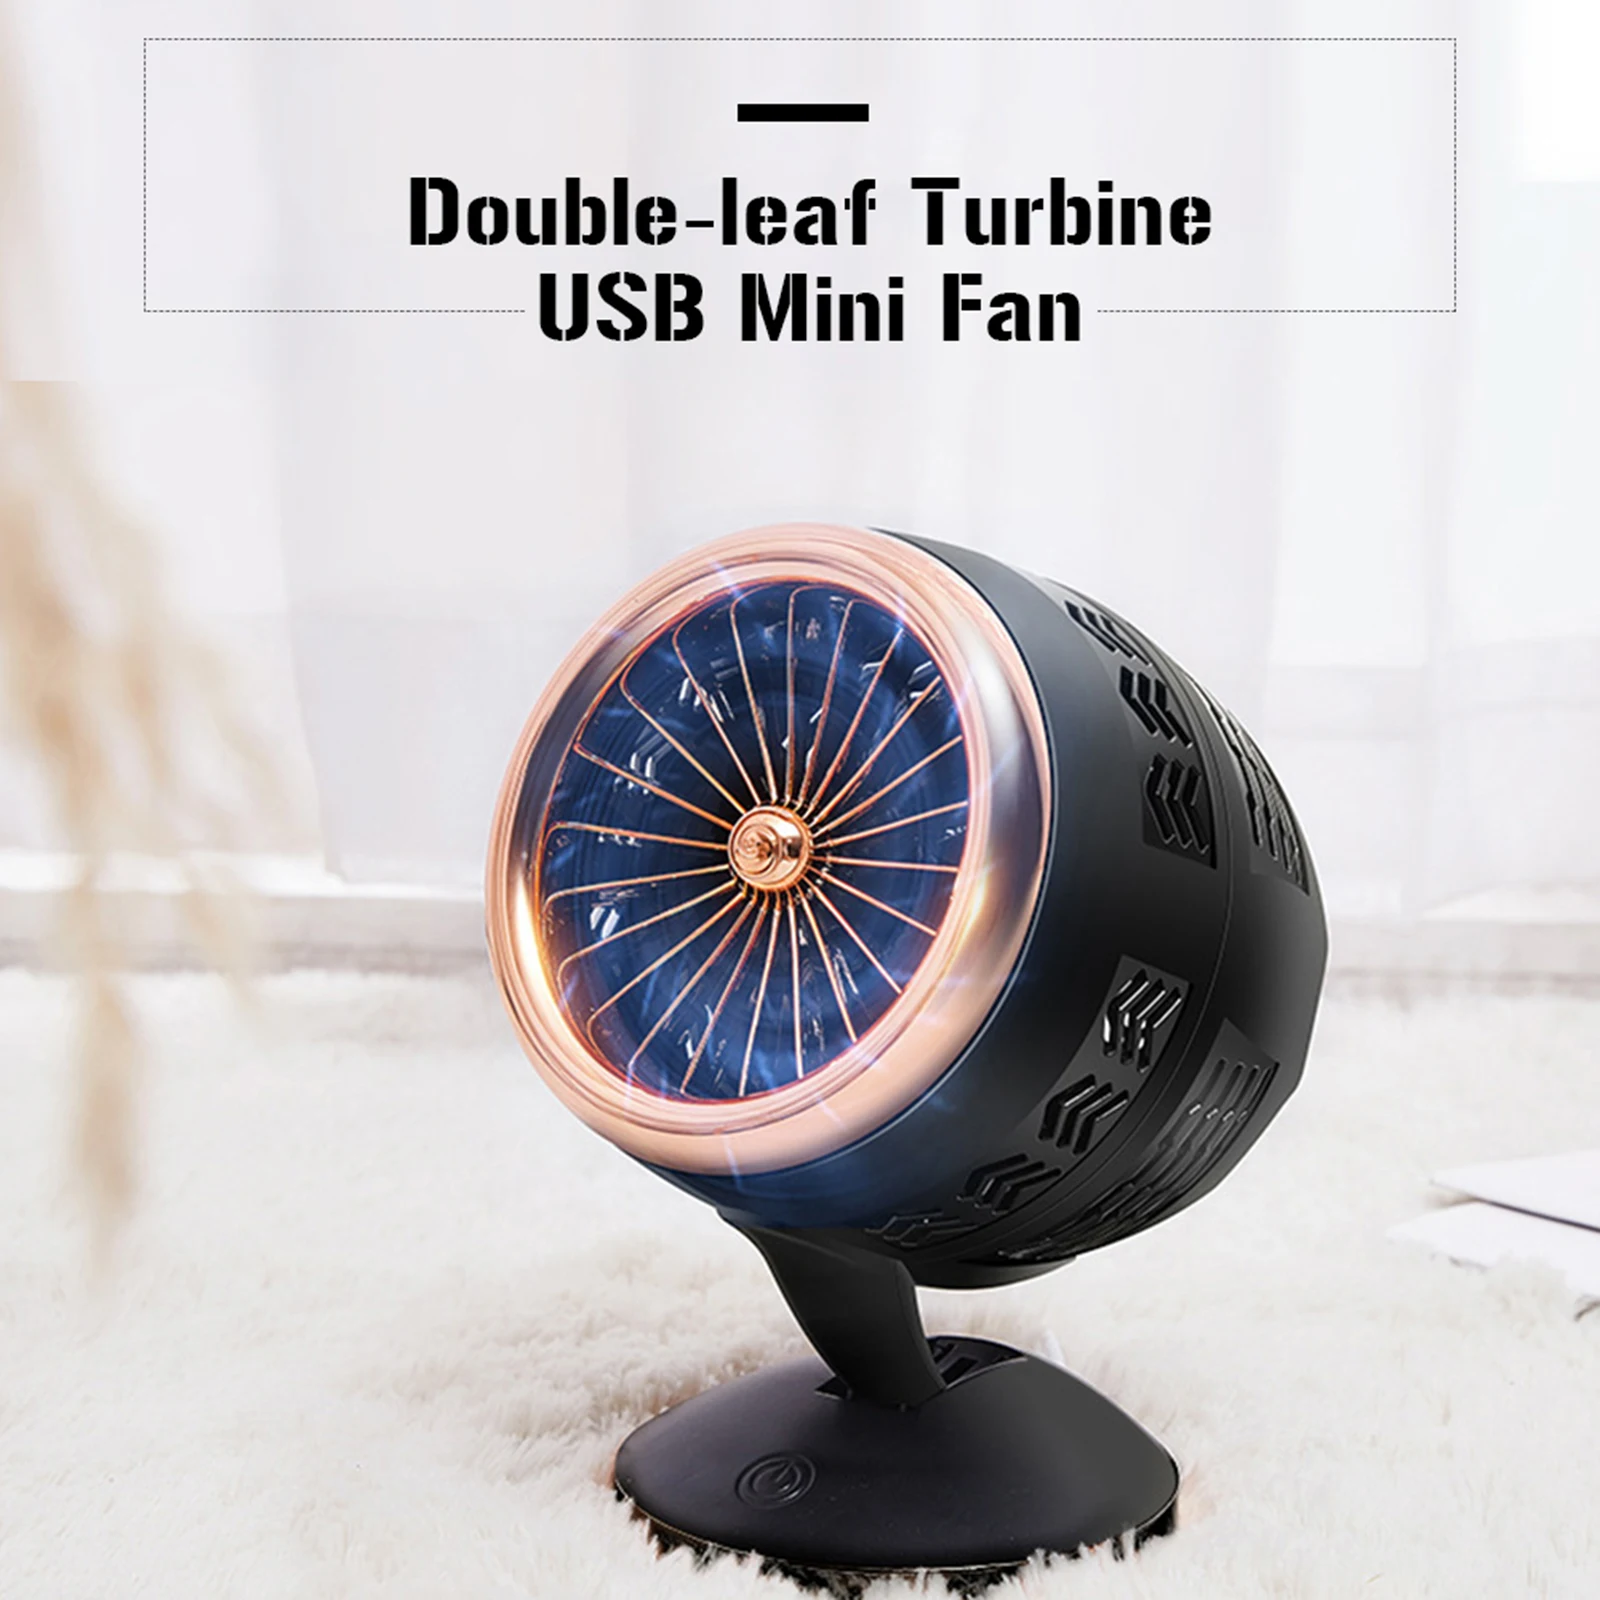 Small Personal Desk USB Fan, Portable Mini Table Fan with Turbo Blades, Whisper Quiet for Home, Office, Outdoor, Travel